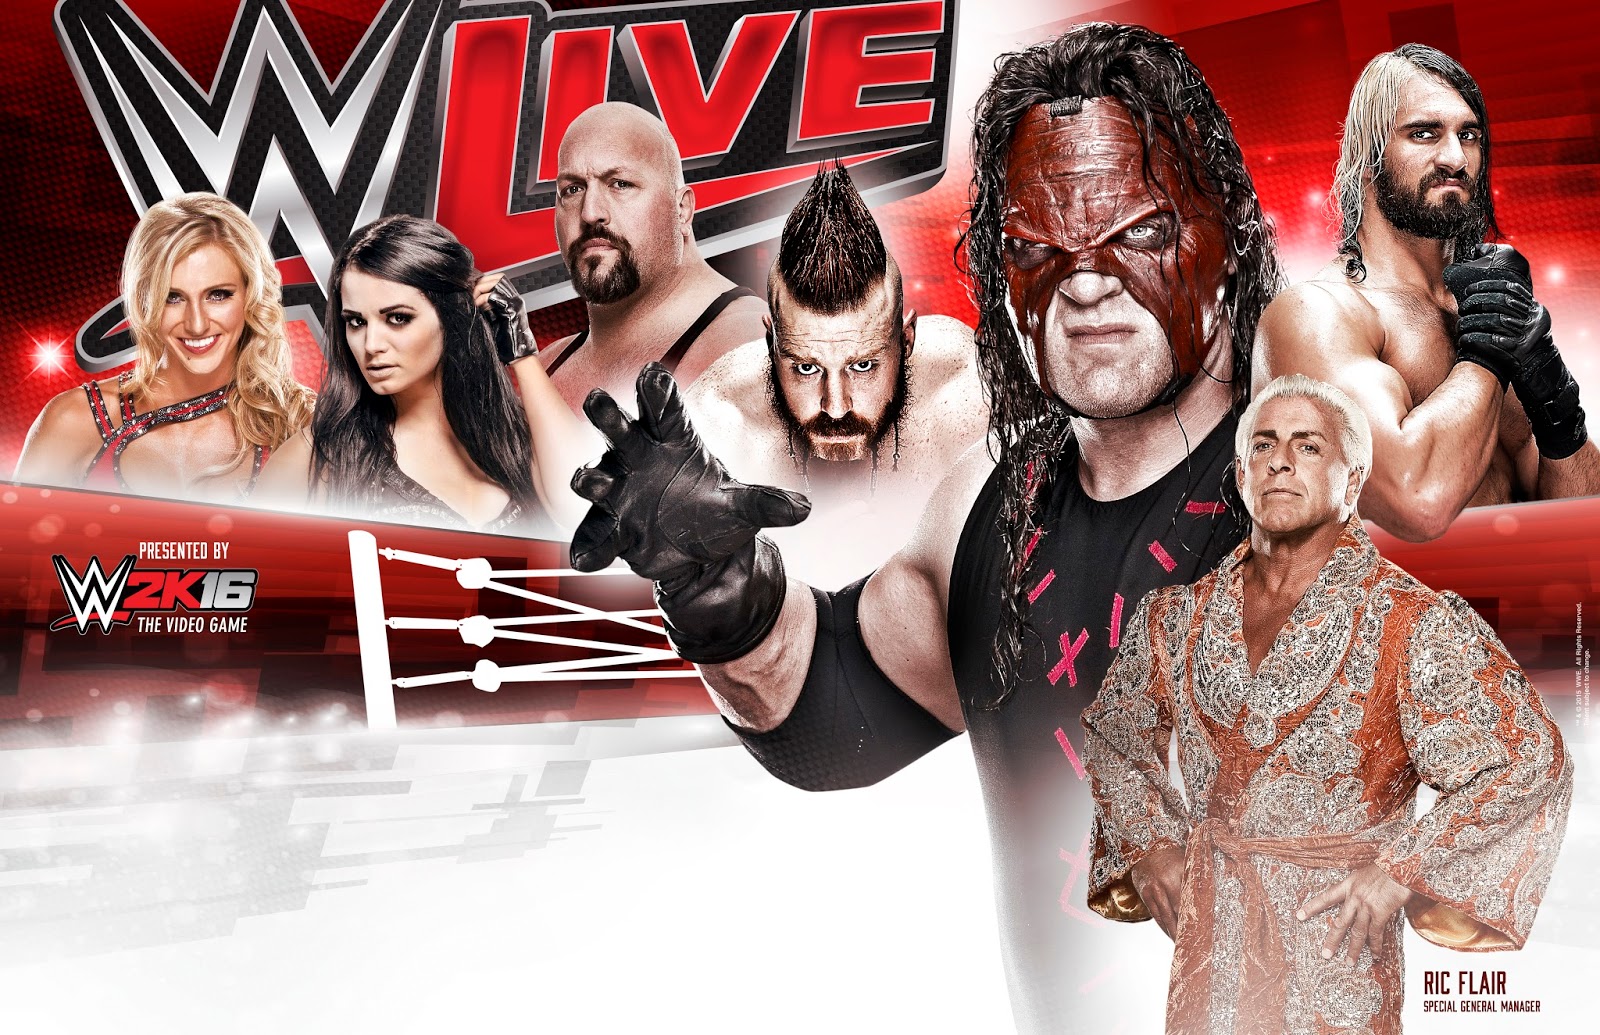 Win the chance to see WWE® Superstars and Divas live in action in the UK!